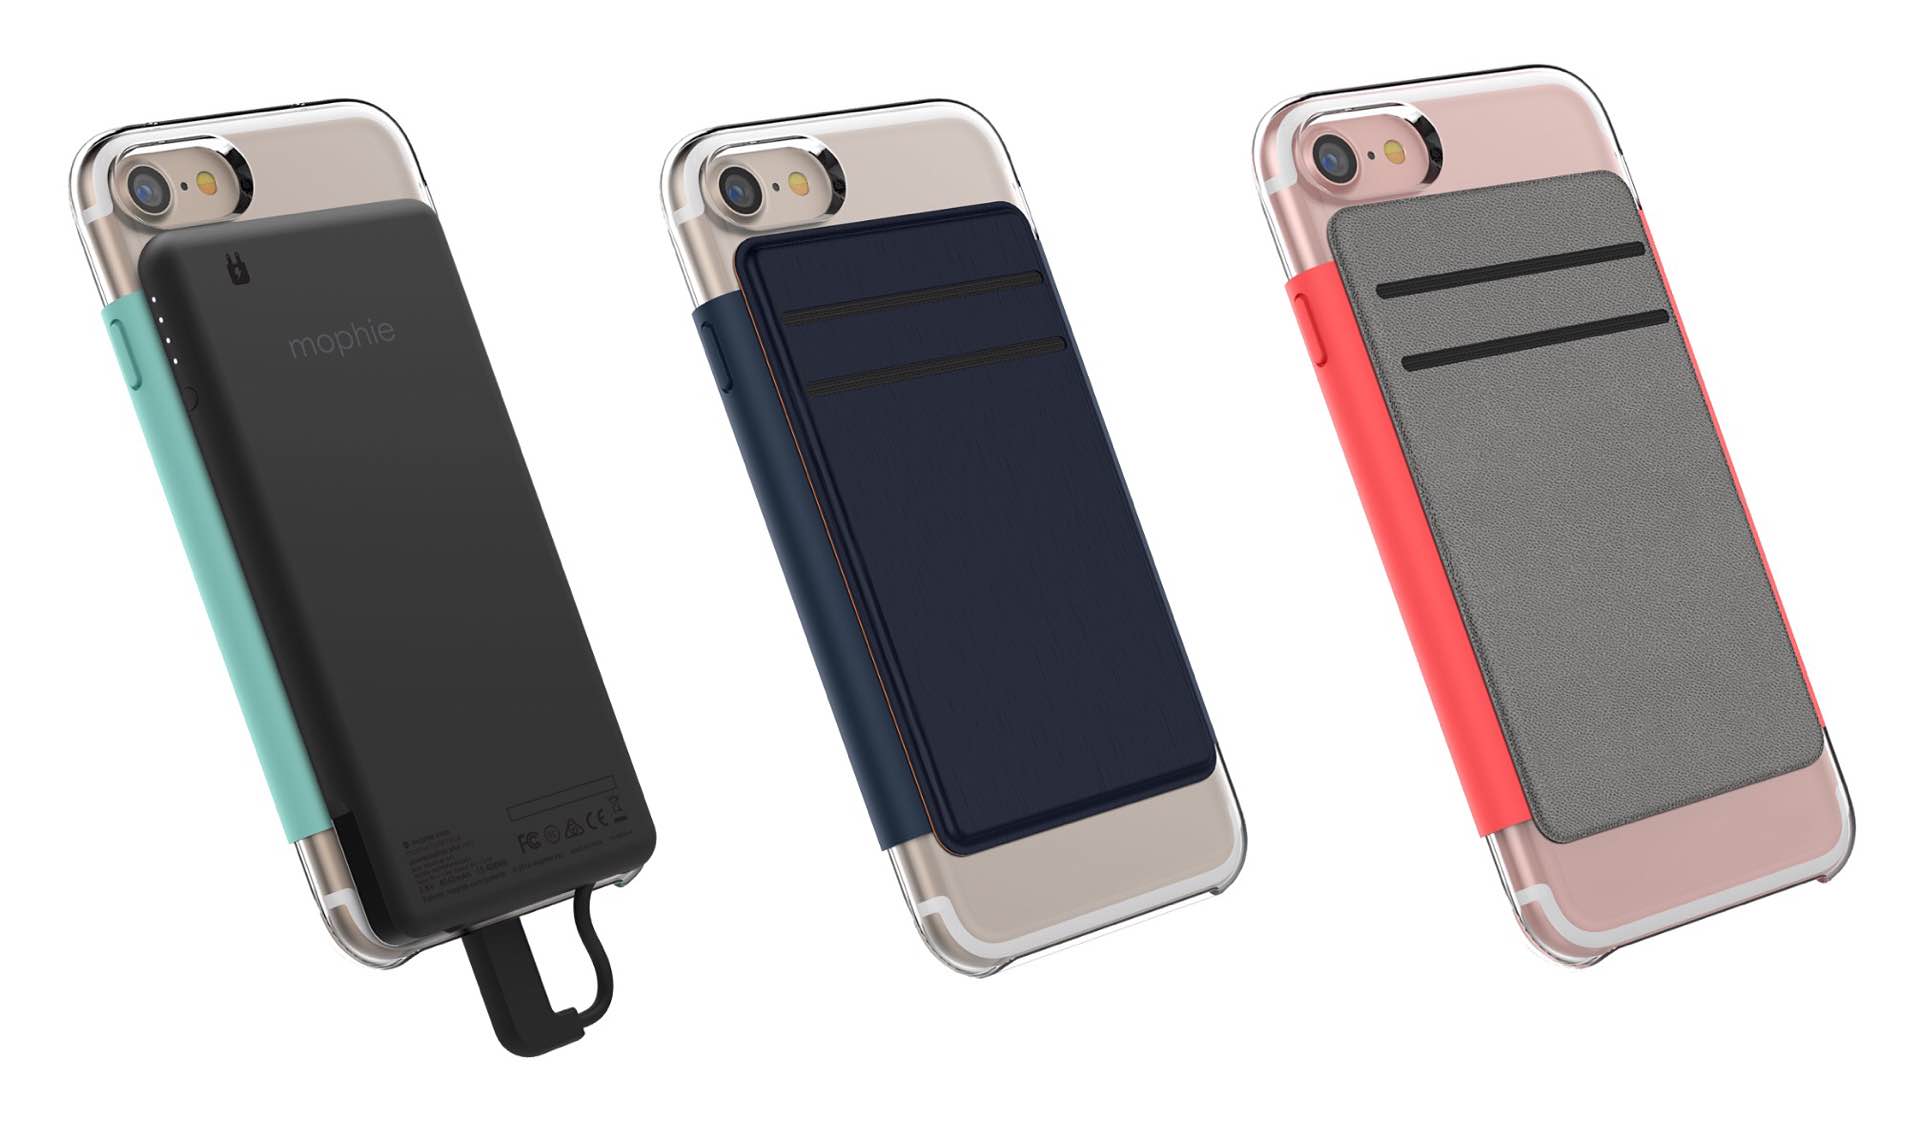 mophie-hold-force-modular-cases-for-iphone-7-7-plus